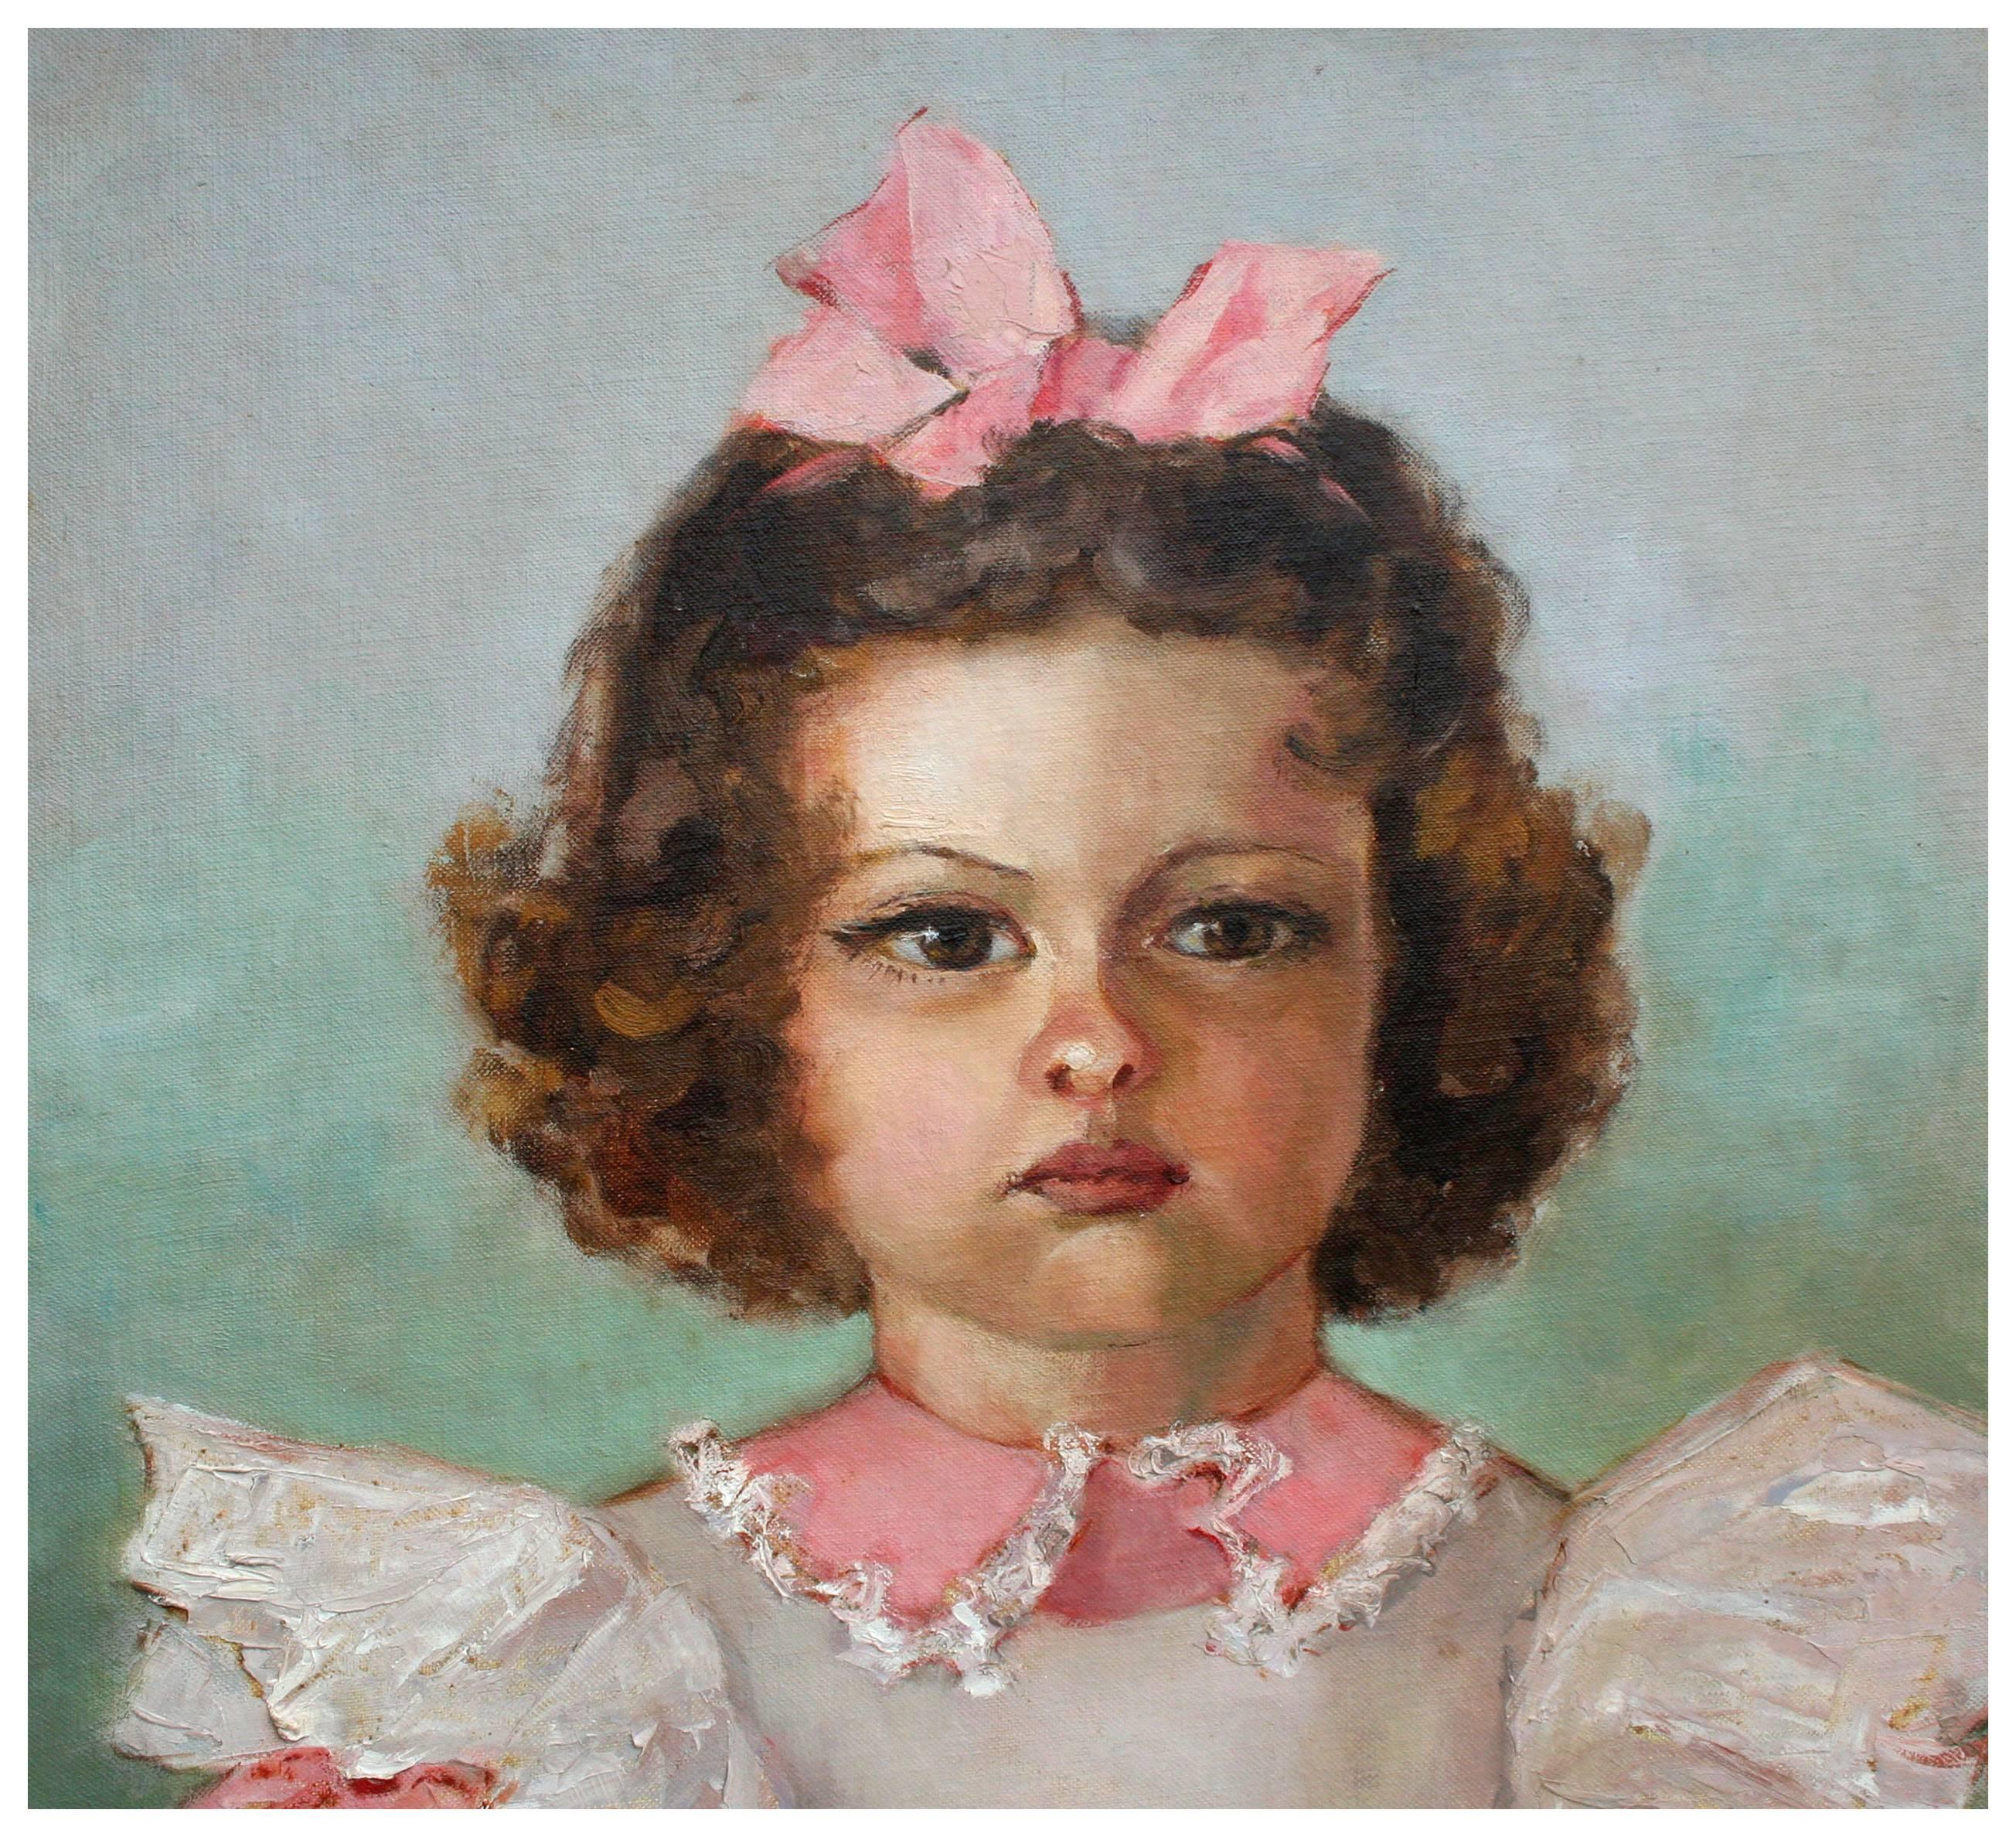 Early 20th Century Young Girl With Pink Bow Portrait - Painting by Helen Enoch Gleiforst